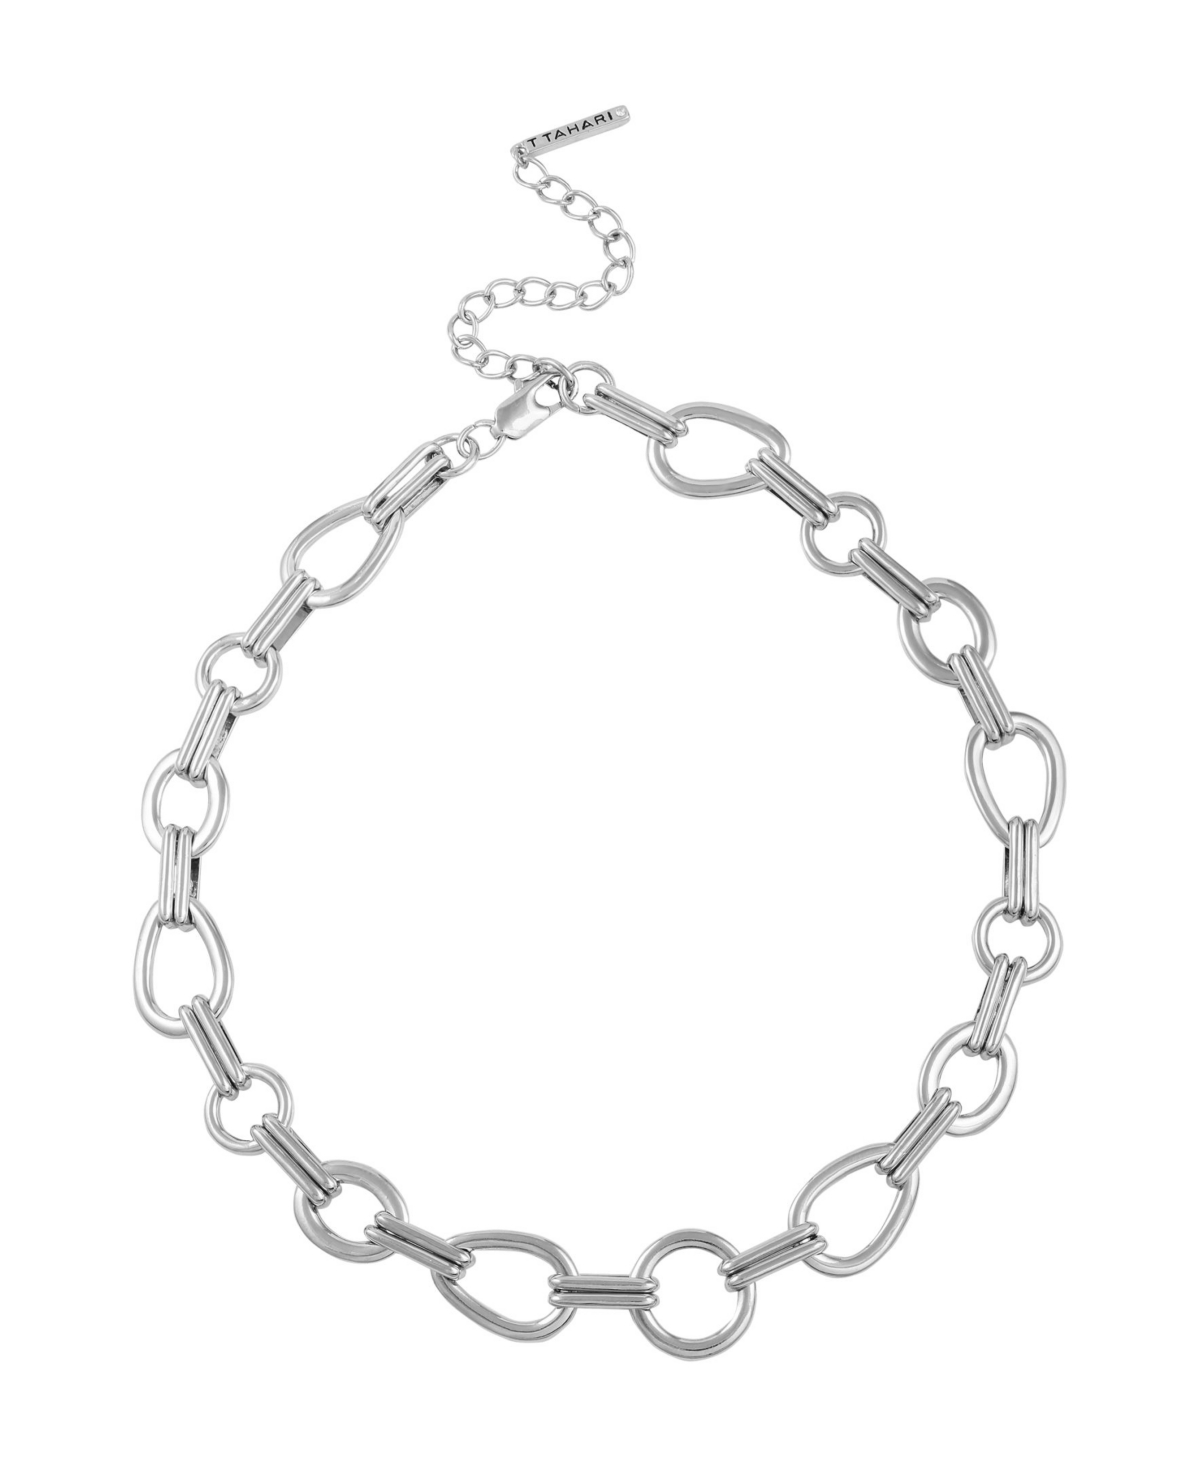 Women's Chain Link Necklace - Gold